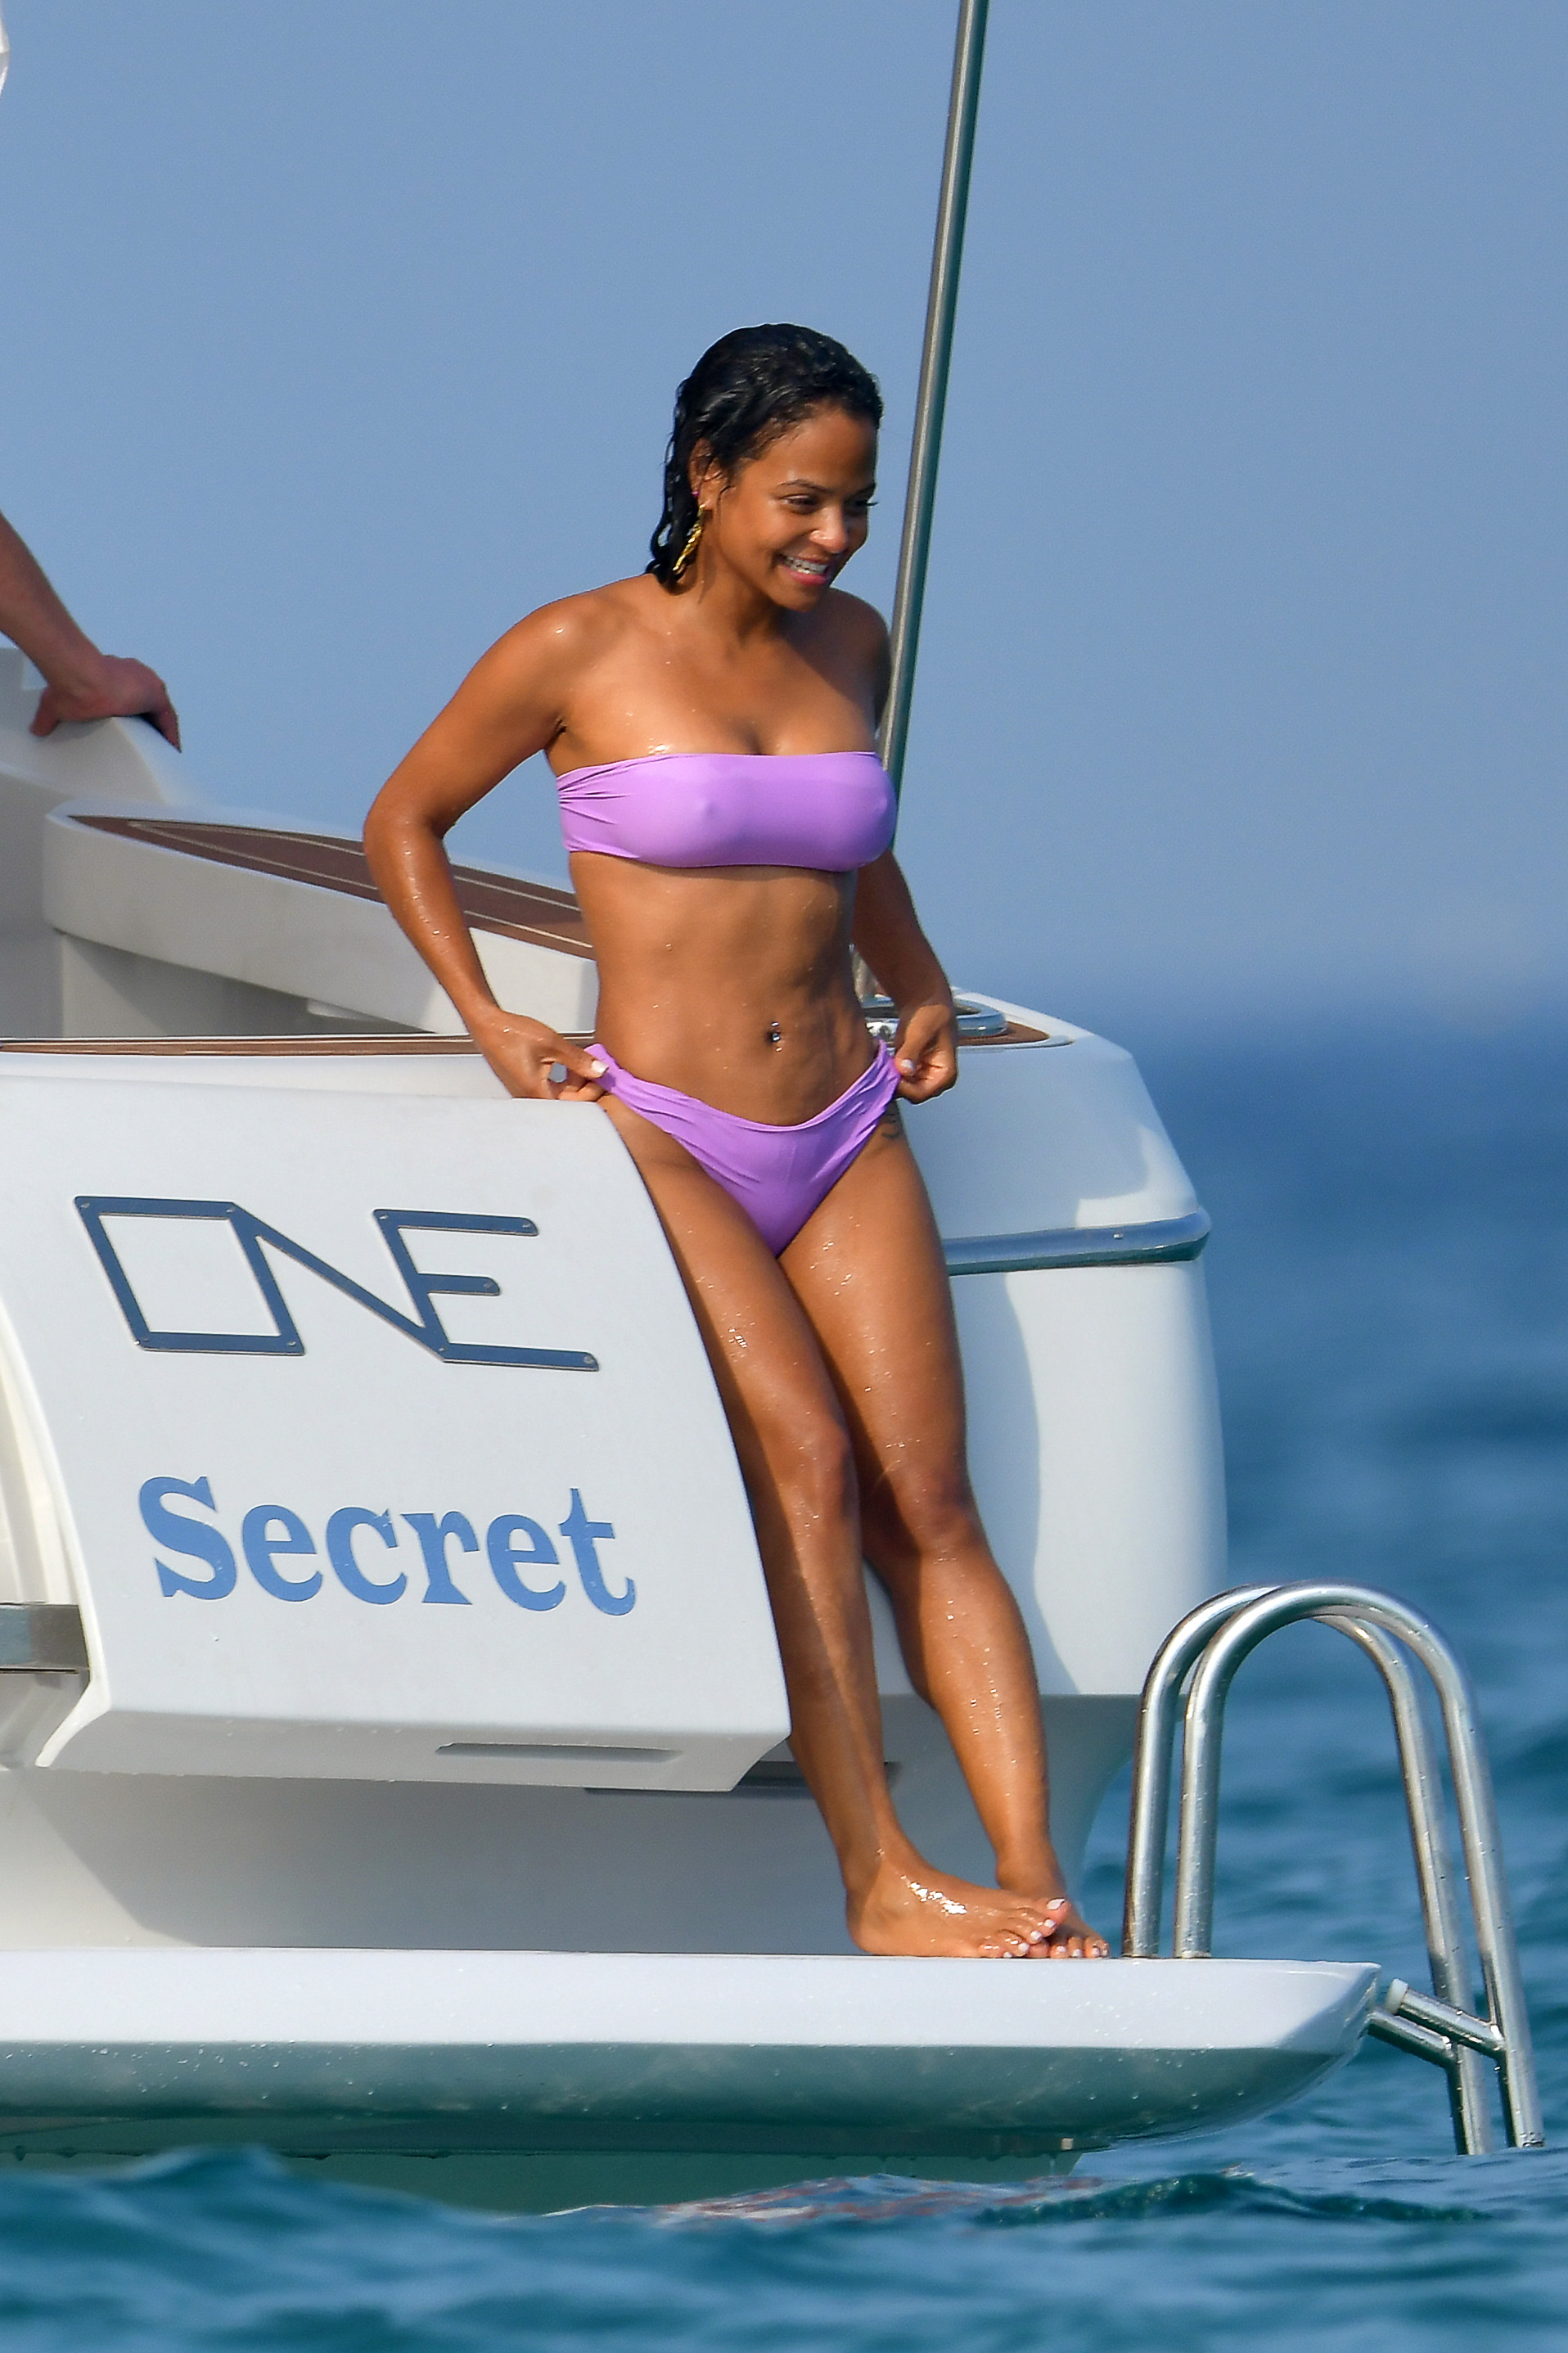 Christina Milian pokies and cameltoe in sexy bikini candids on a boat during holiday UHQ (41).jpg